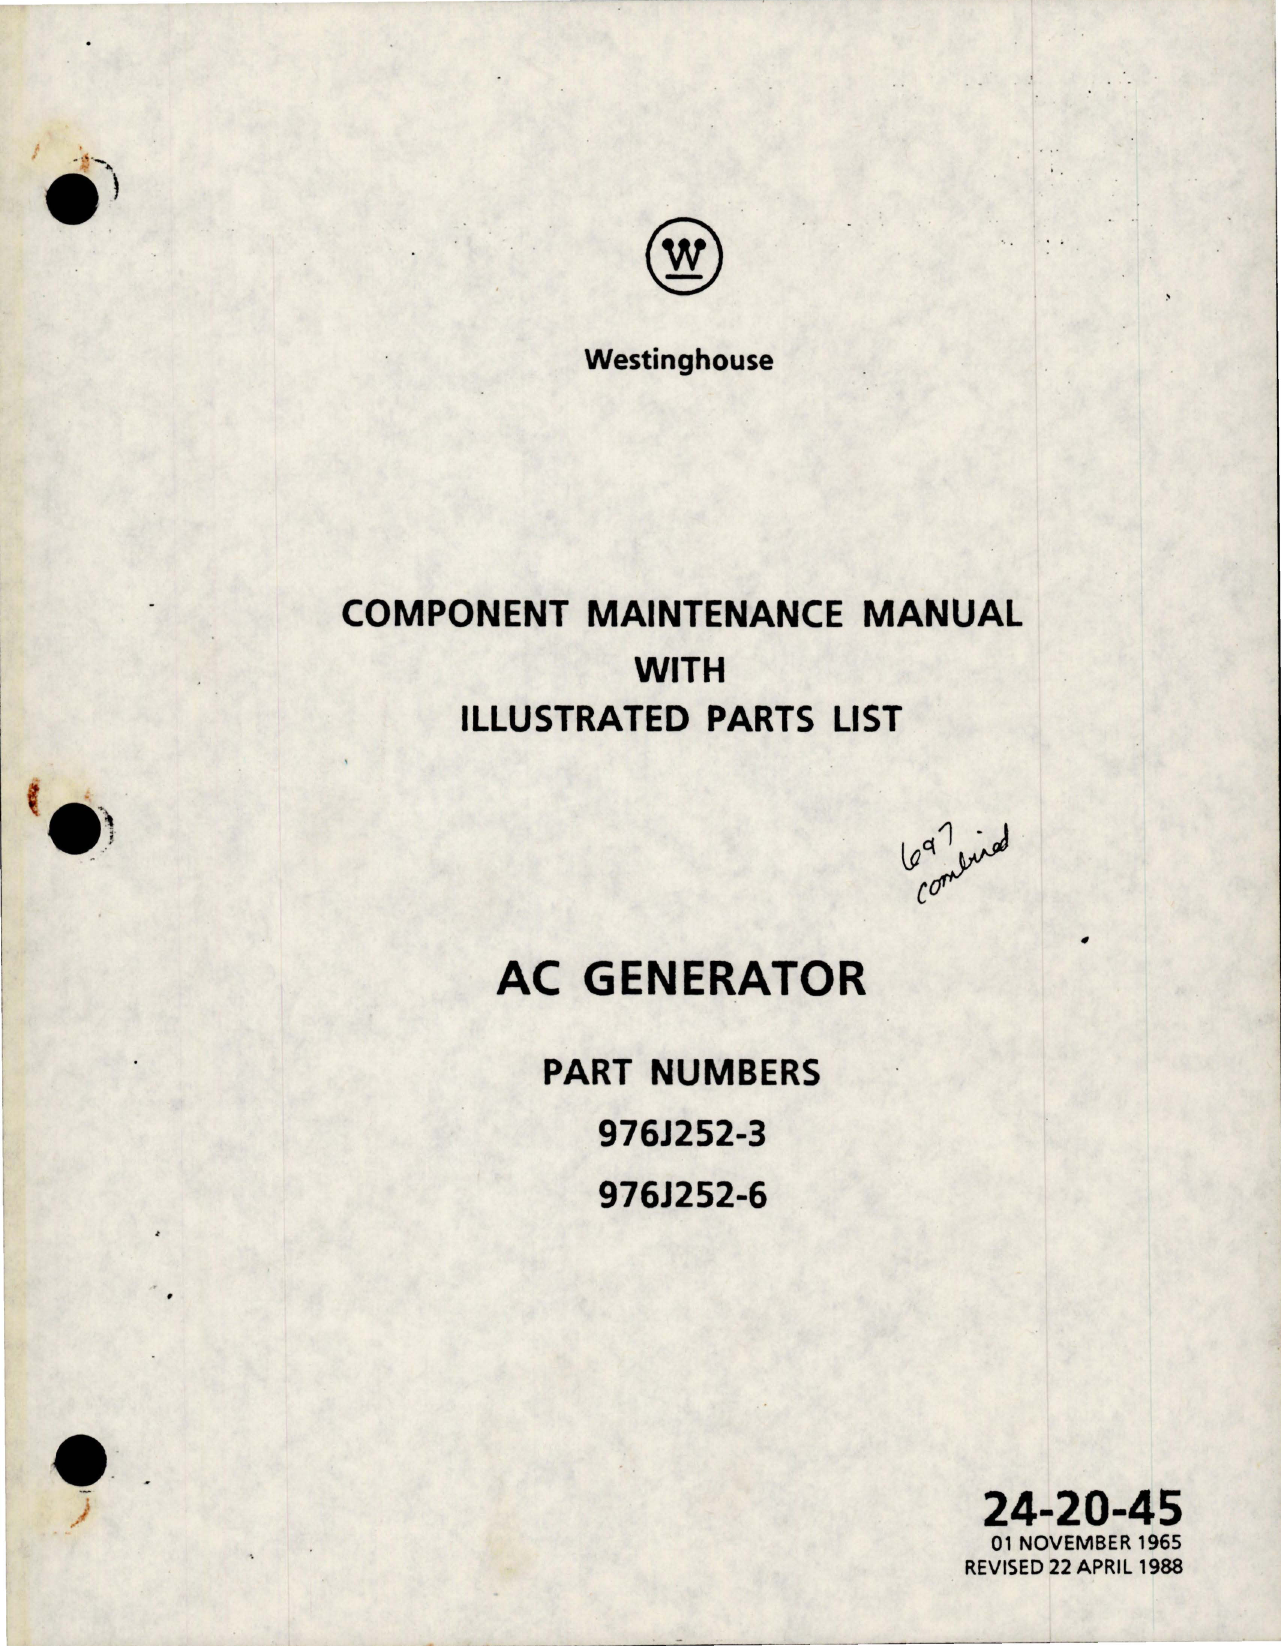 Sample page 1 from AirCorps Library document: Maintenance Manual w Parts List for AC Generator - Parts 976J252-3 and 976J252-6